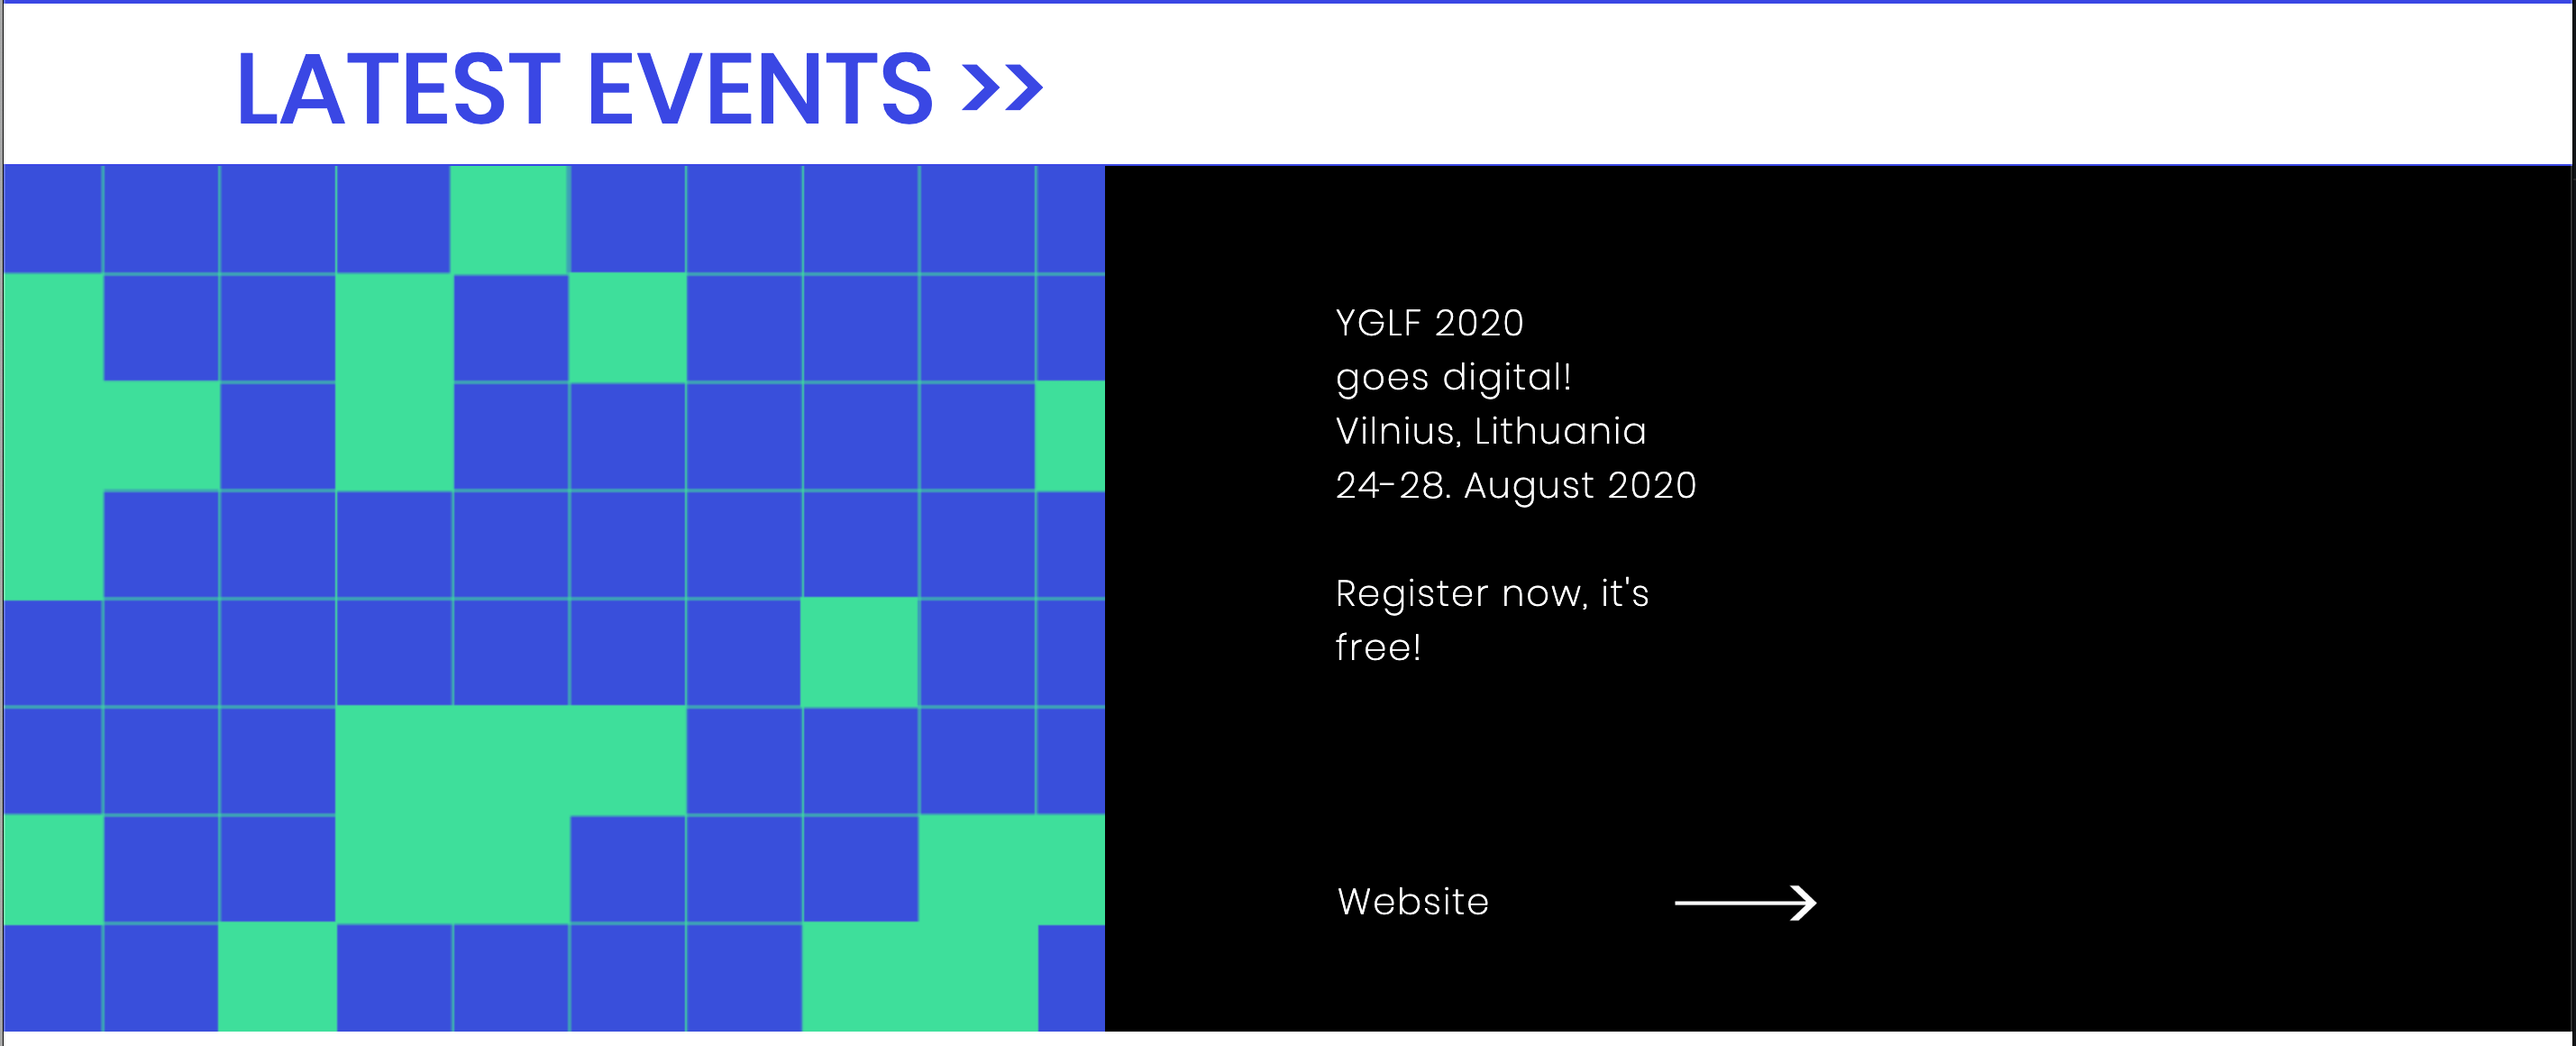 You Gotta Love Frontend's "Latest Events" block